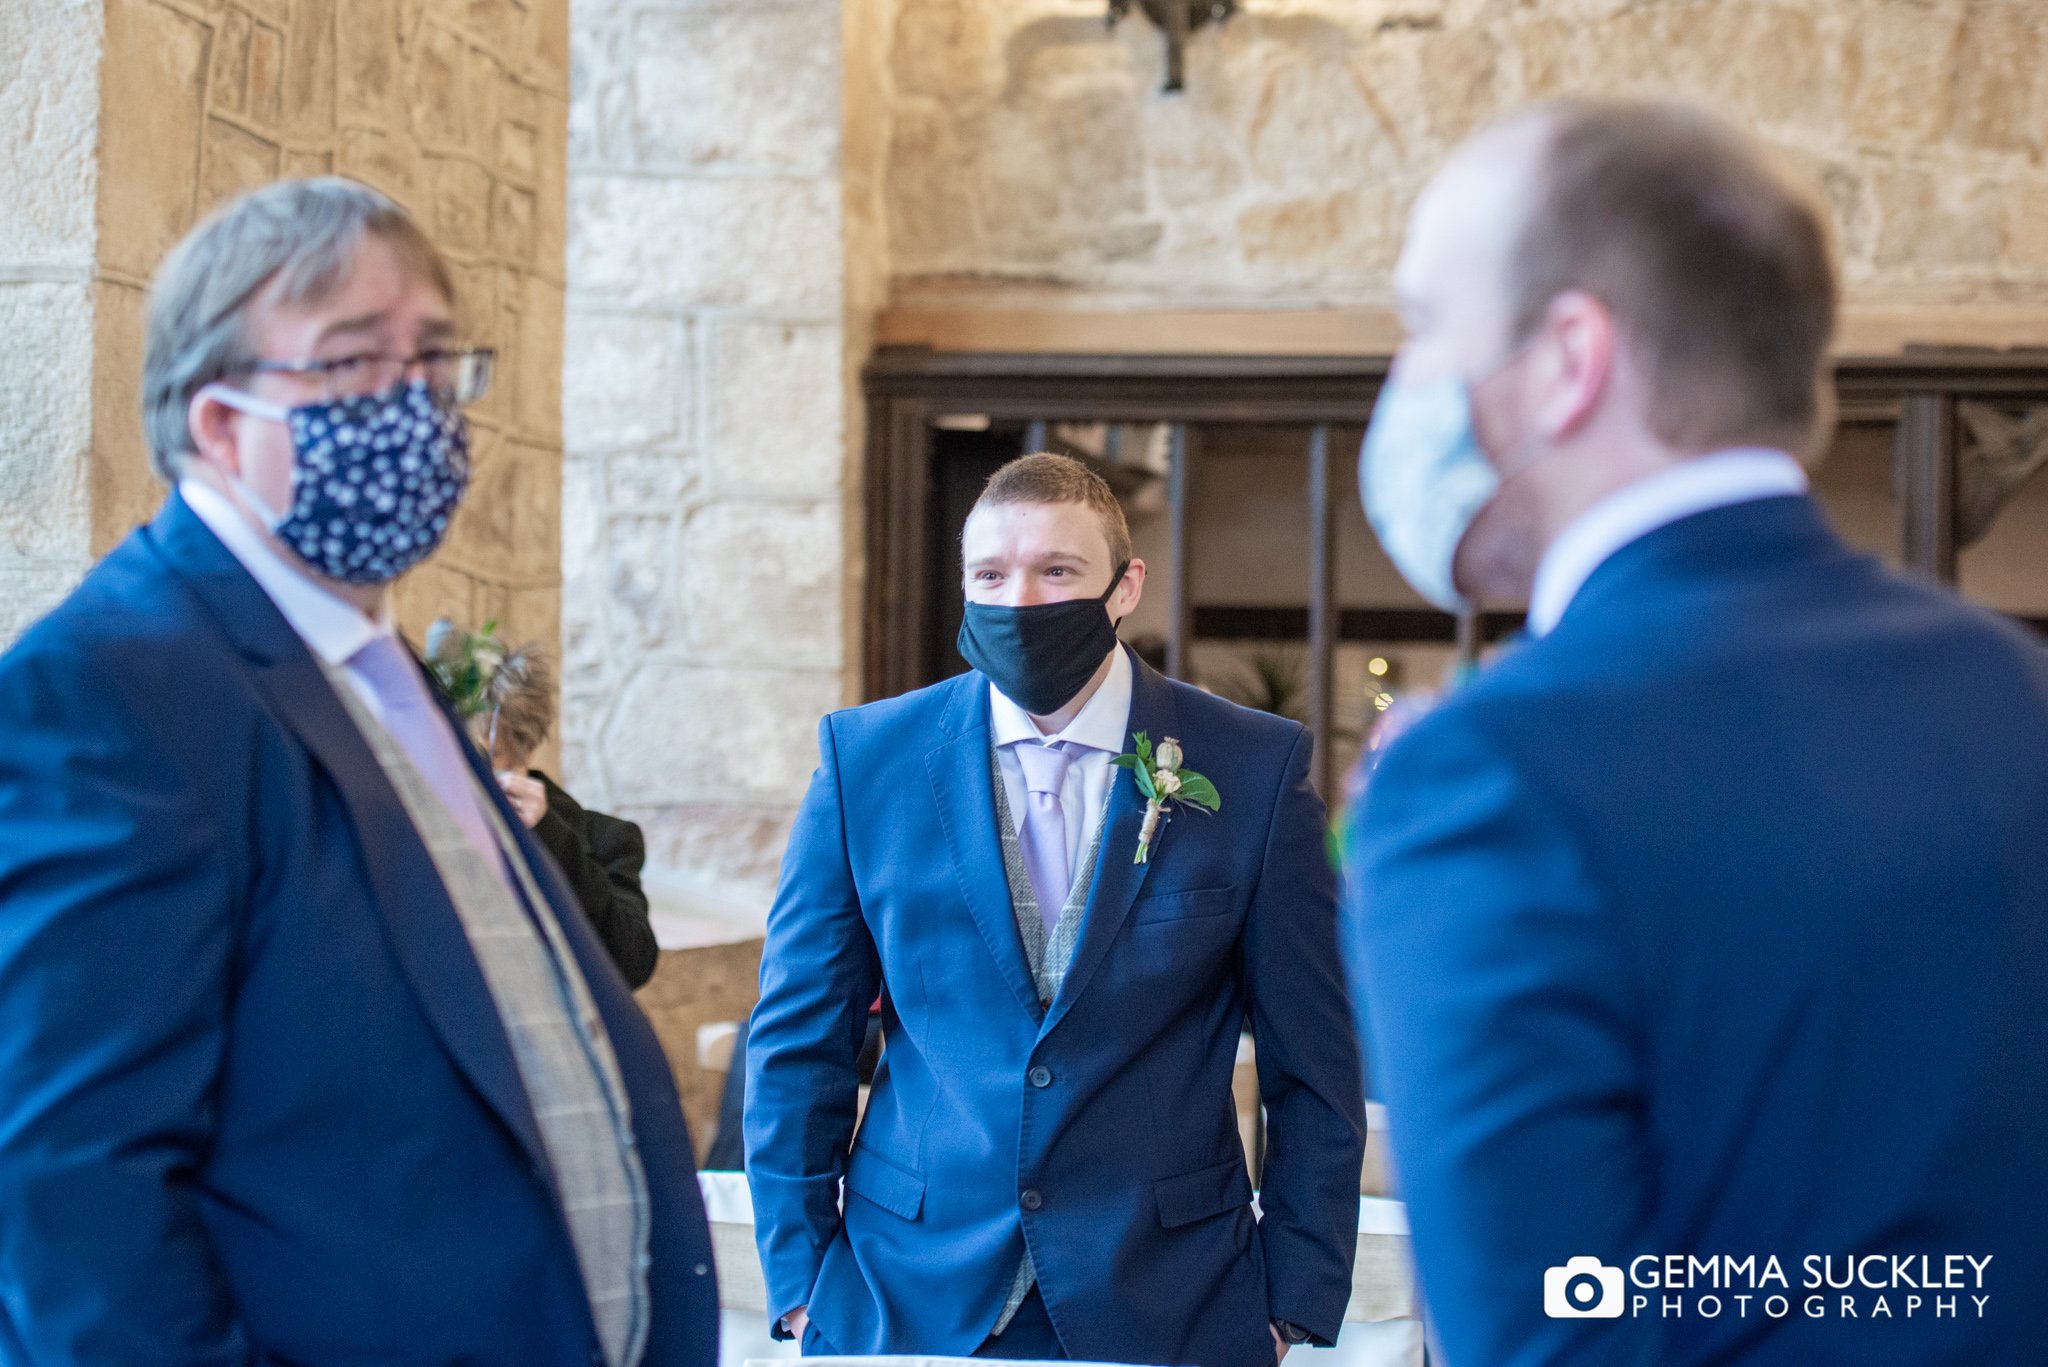 the groomsmen stood in mask at the priests house